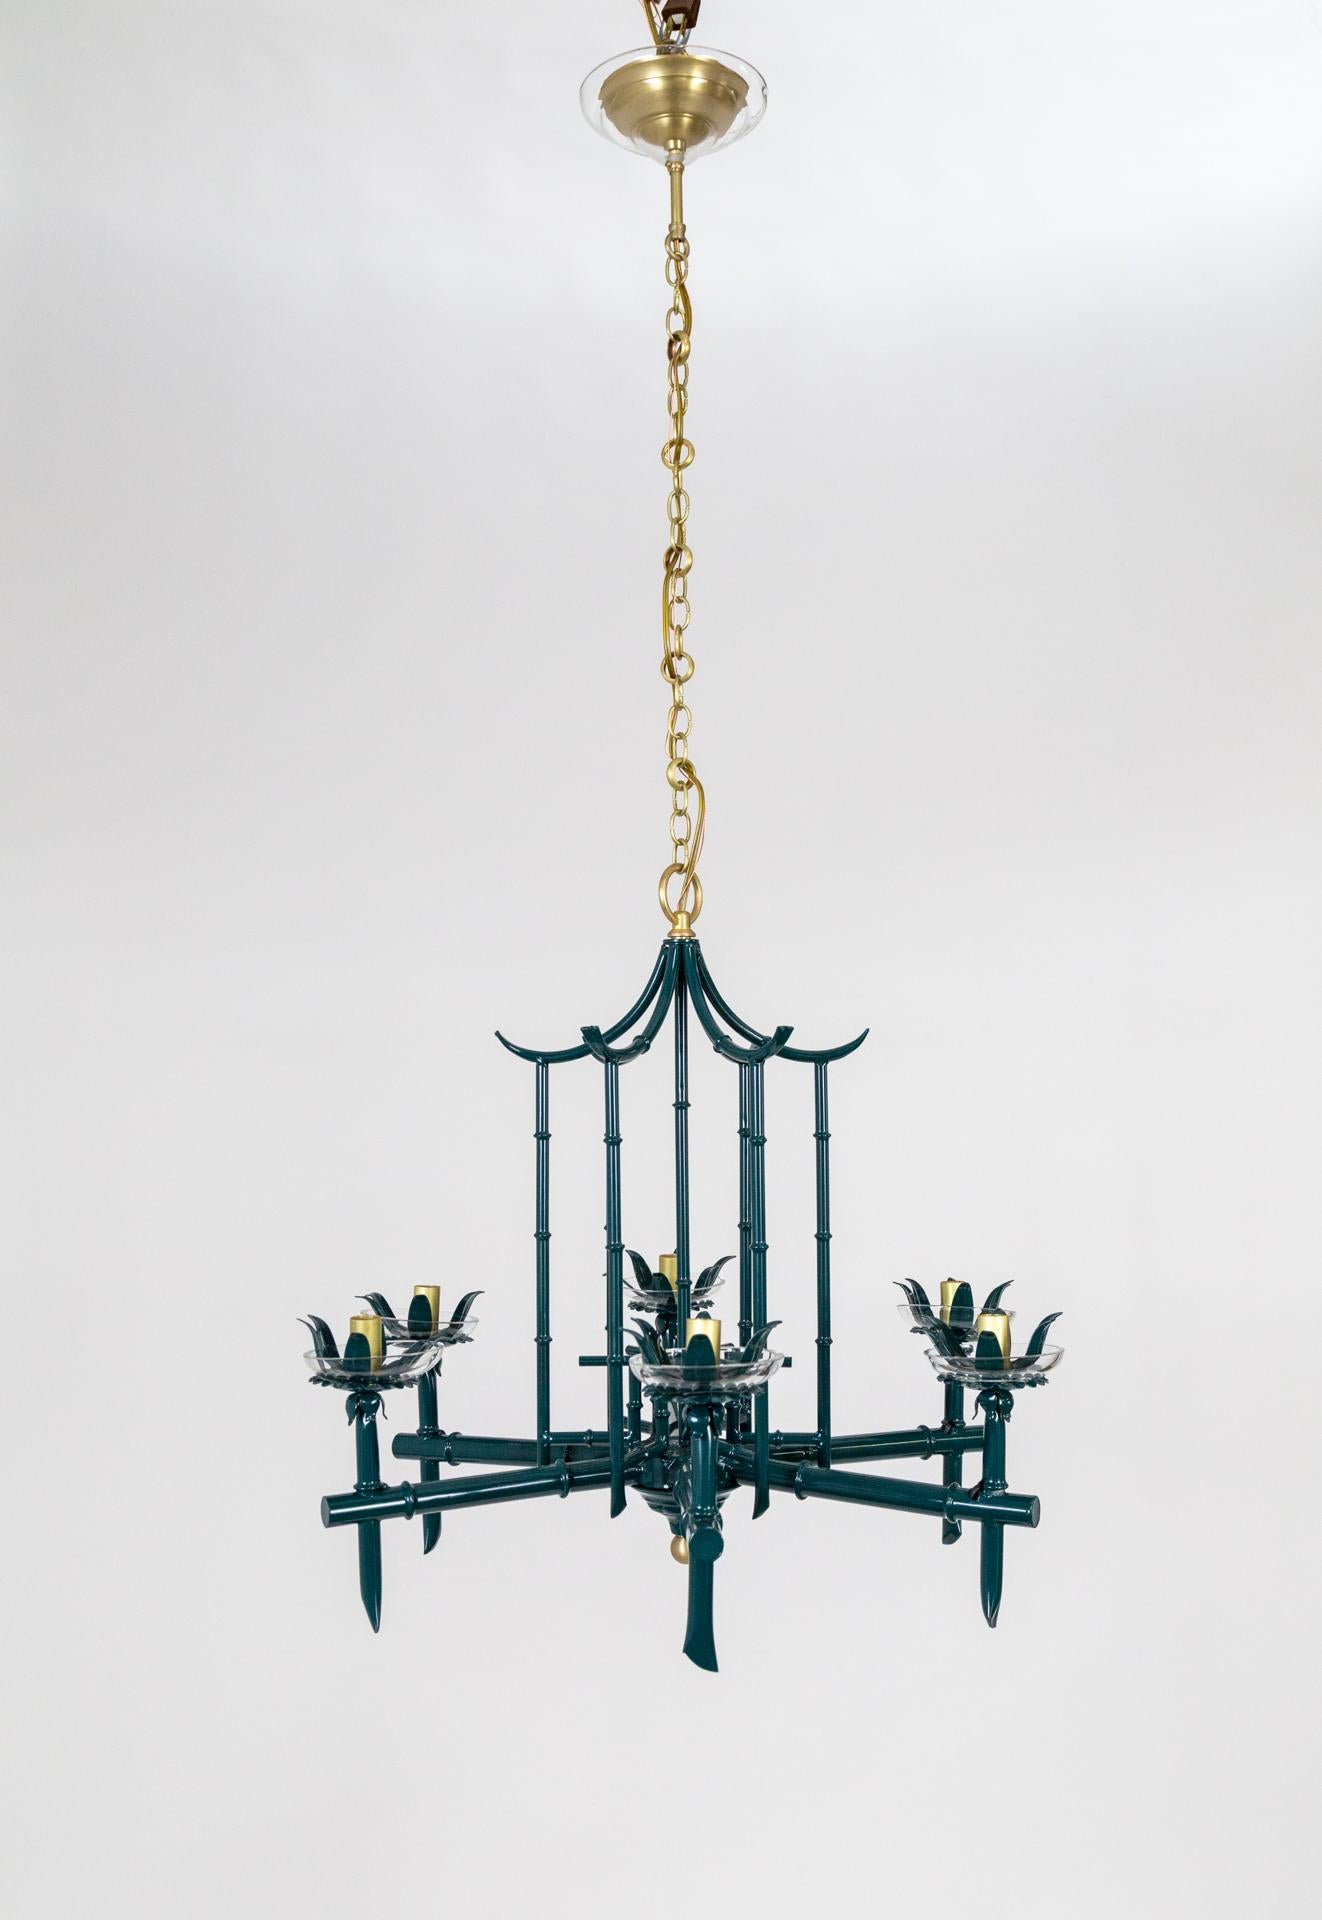 A glossy, pine-forest green, faux bamboo, birdcage pagoda chandelier with six lights. Palm Beach style, with a 